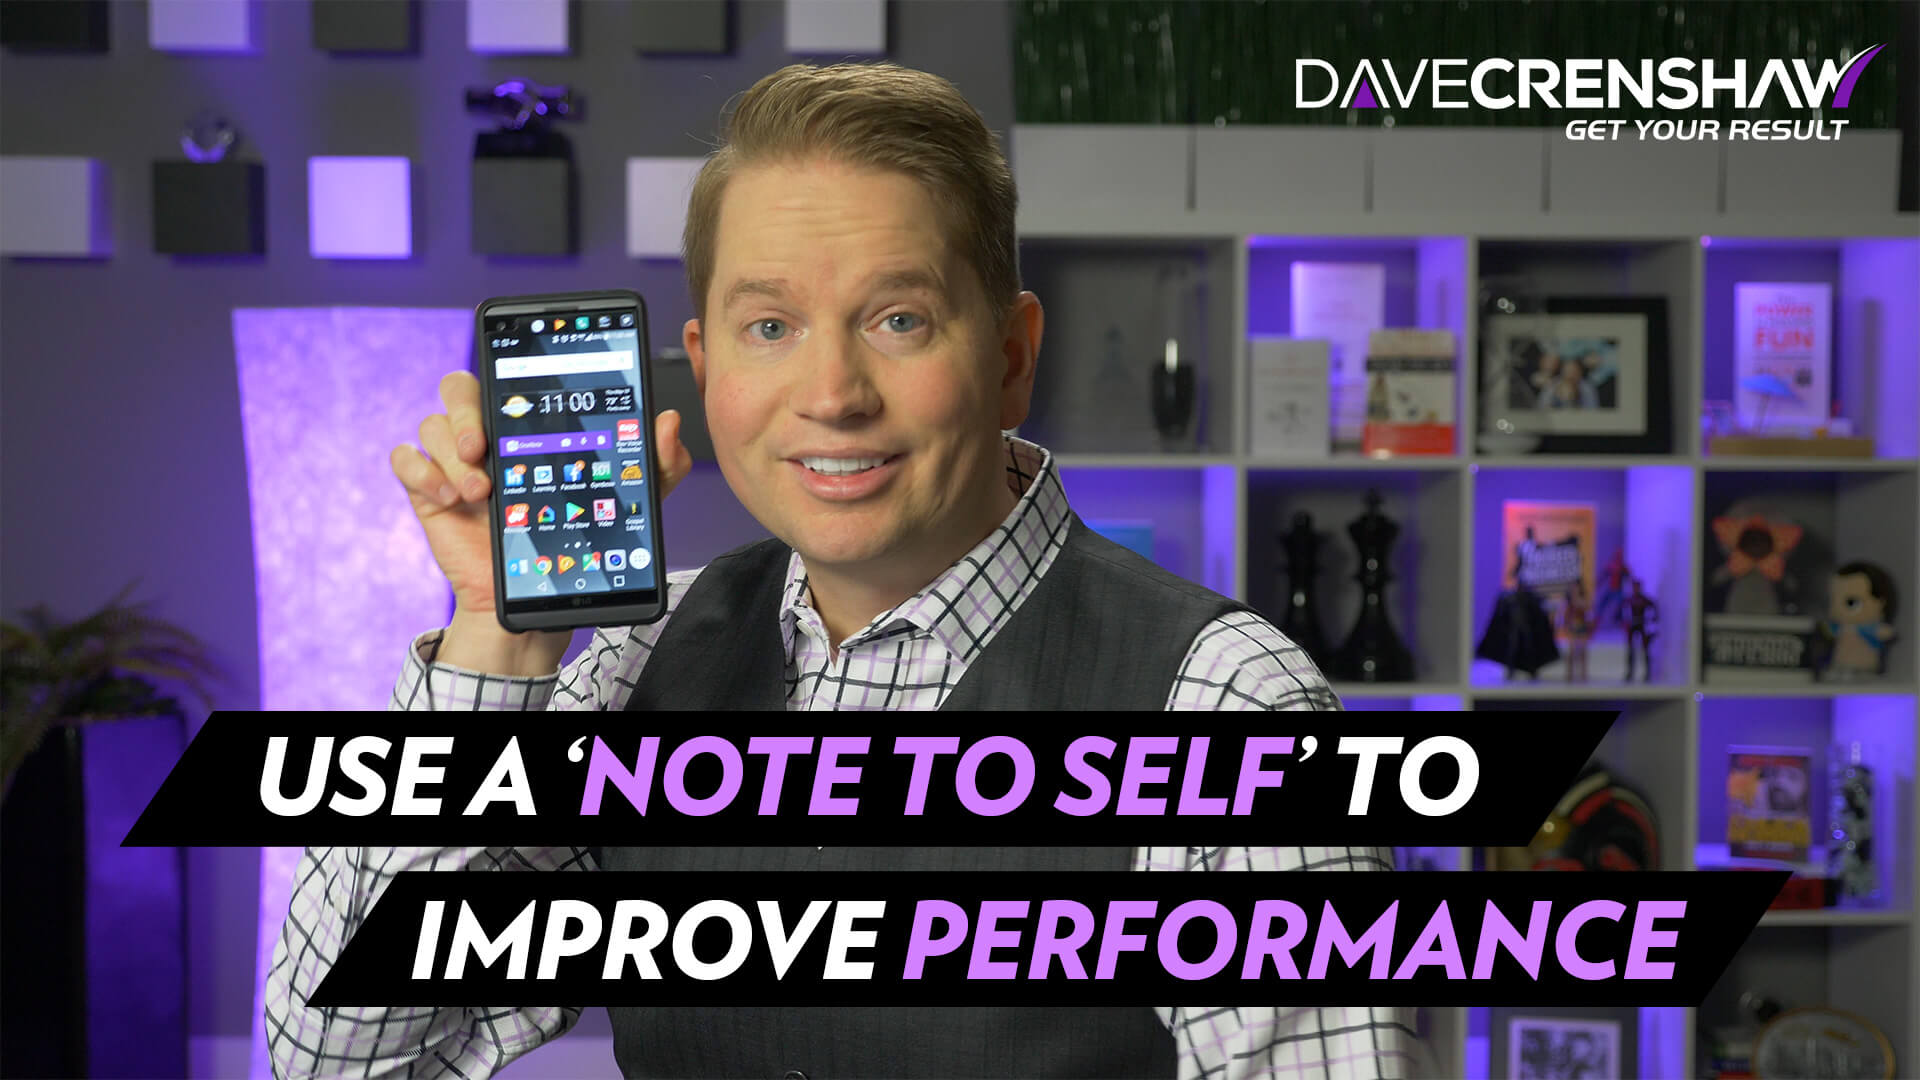 How a ‘Note to Self’ improves your performance